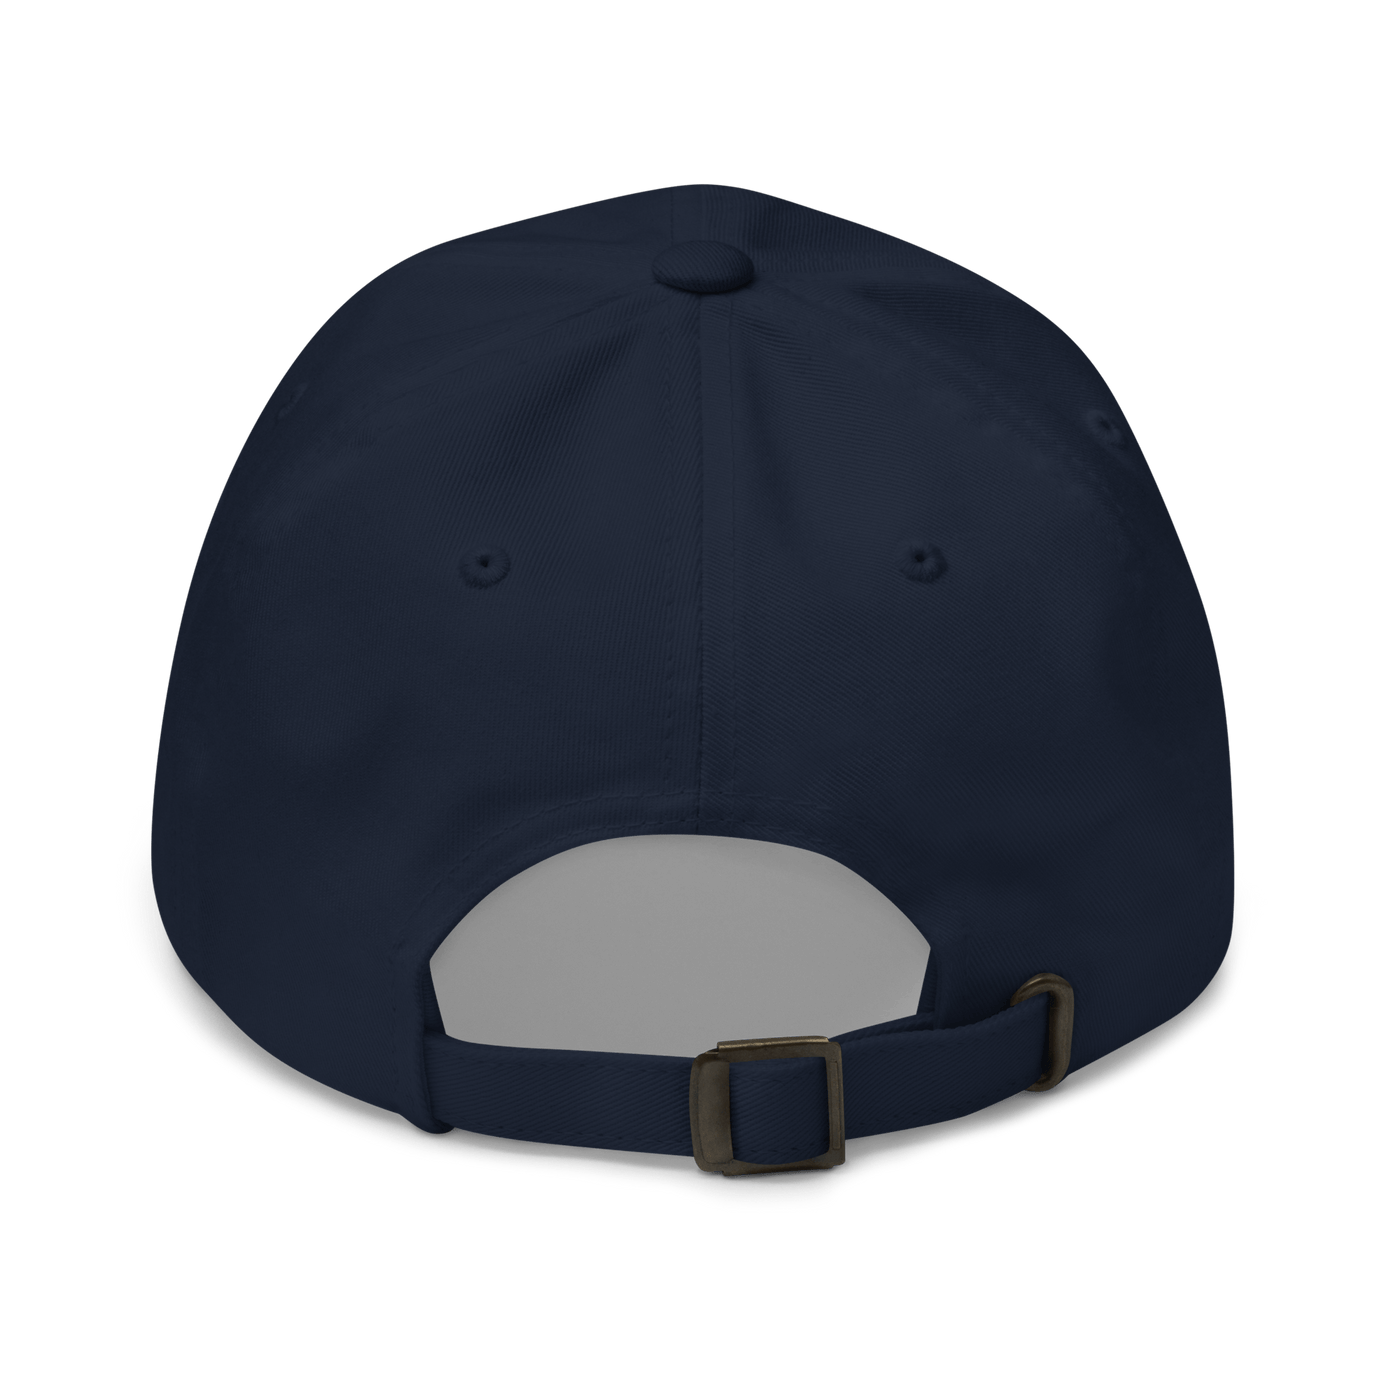 Future Milf Dad hat - Navy - - Just Another Cap Store